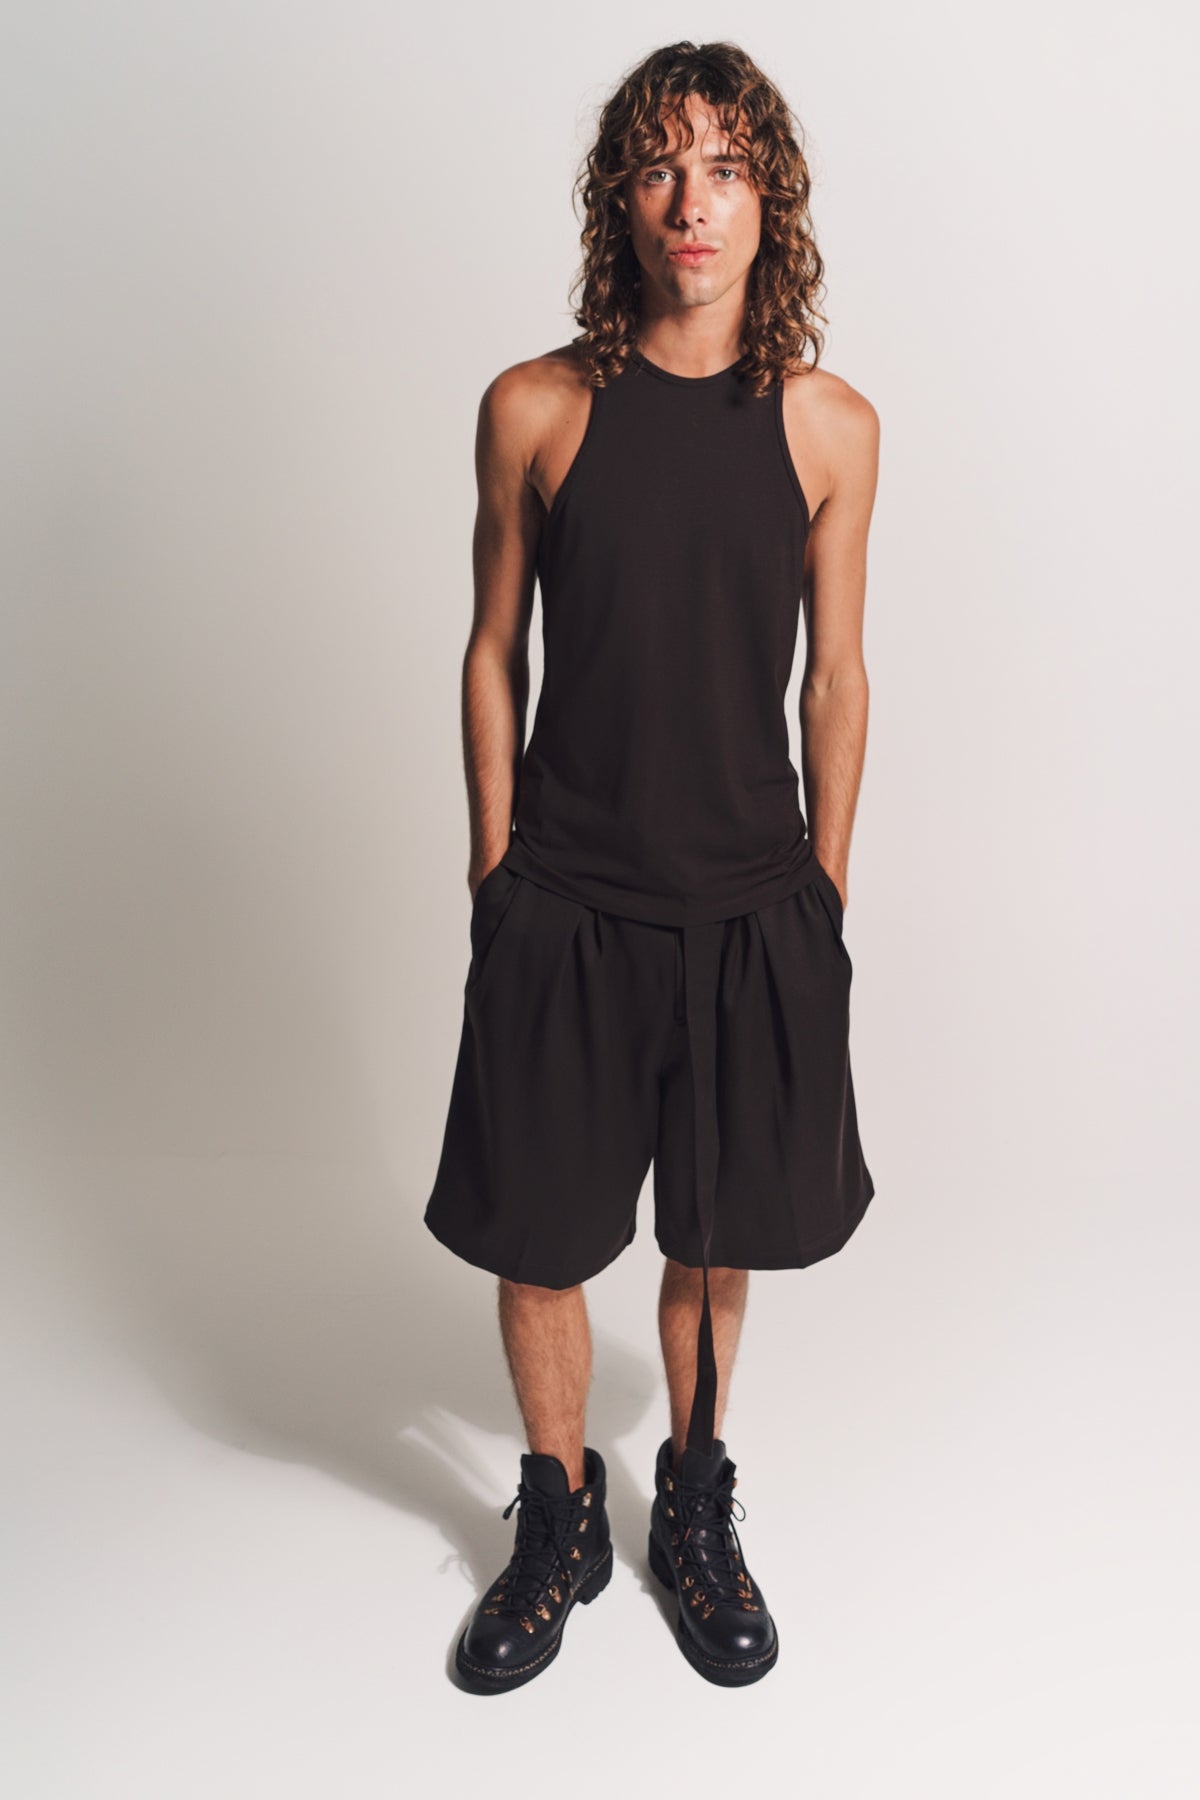 LOUIS GABRIEL NOUCHI | WIDE SHORTS WITH DOUBLE PLEATS AND BELT IN WOOL